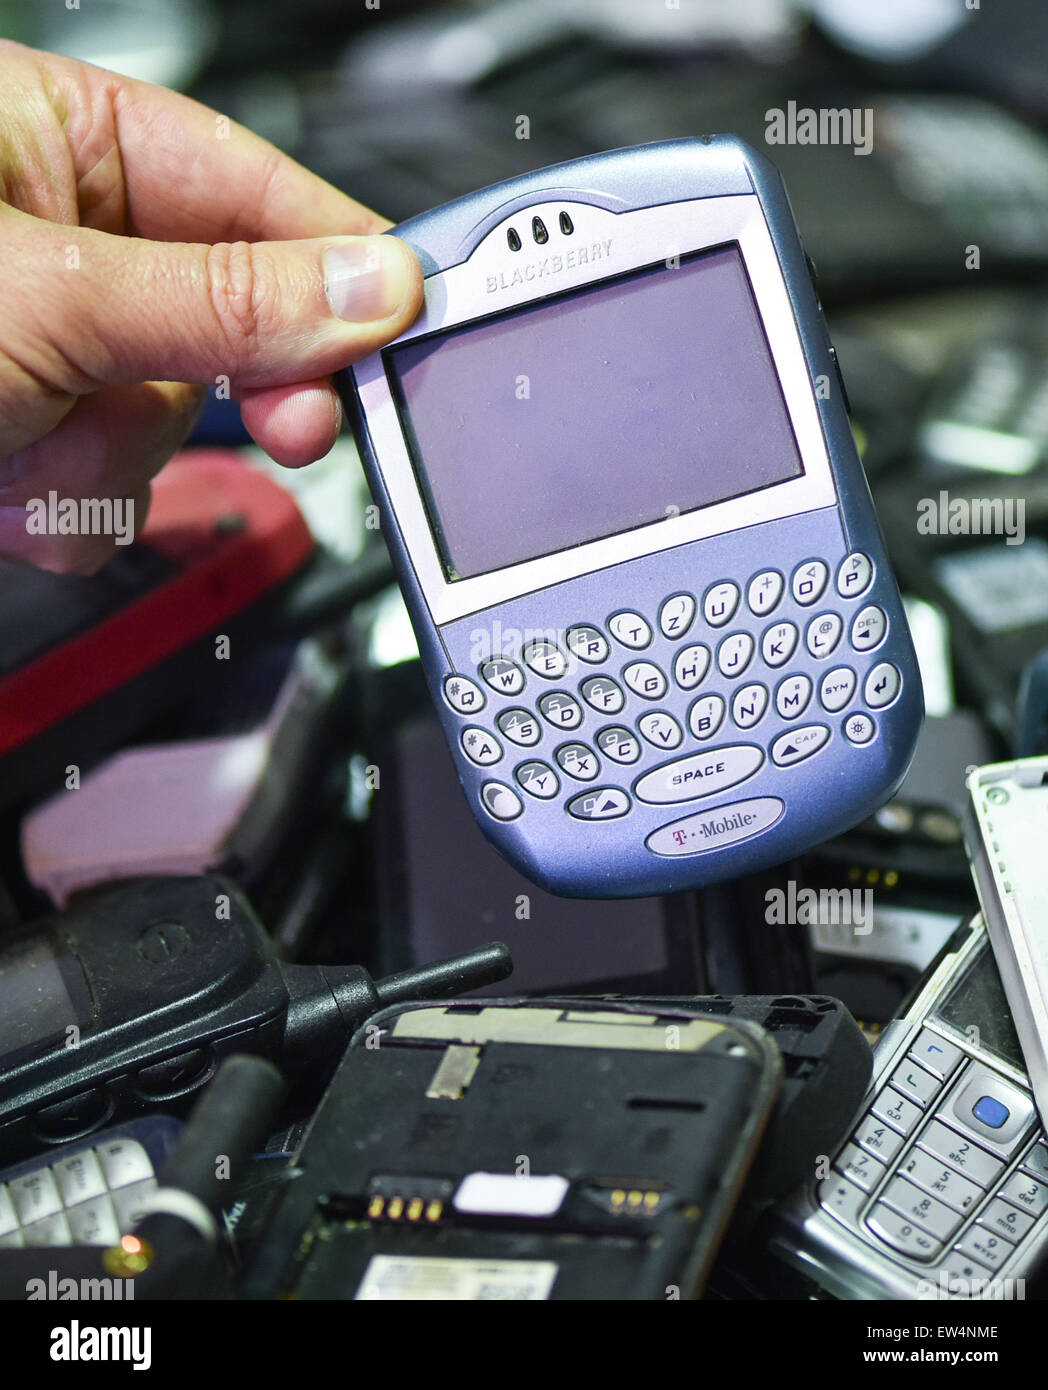 Luststadt, Germany. 27th May, 2015. A hand holds an old mobile phone in the recycling company ALBA in Luststadt, Germany, 27 May 2015. Photo: UWE ANSPACH/dpa/Alamy Live News Stock Photo